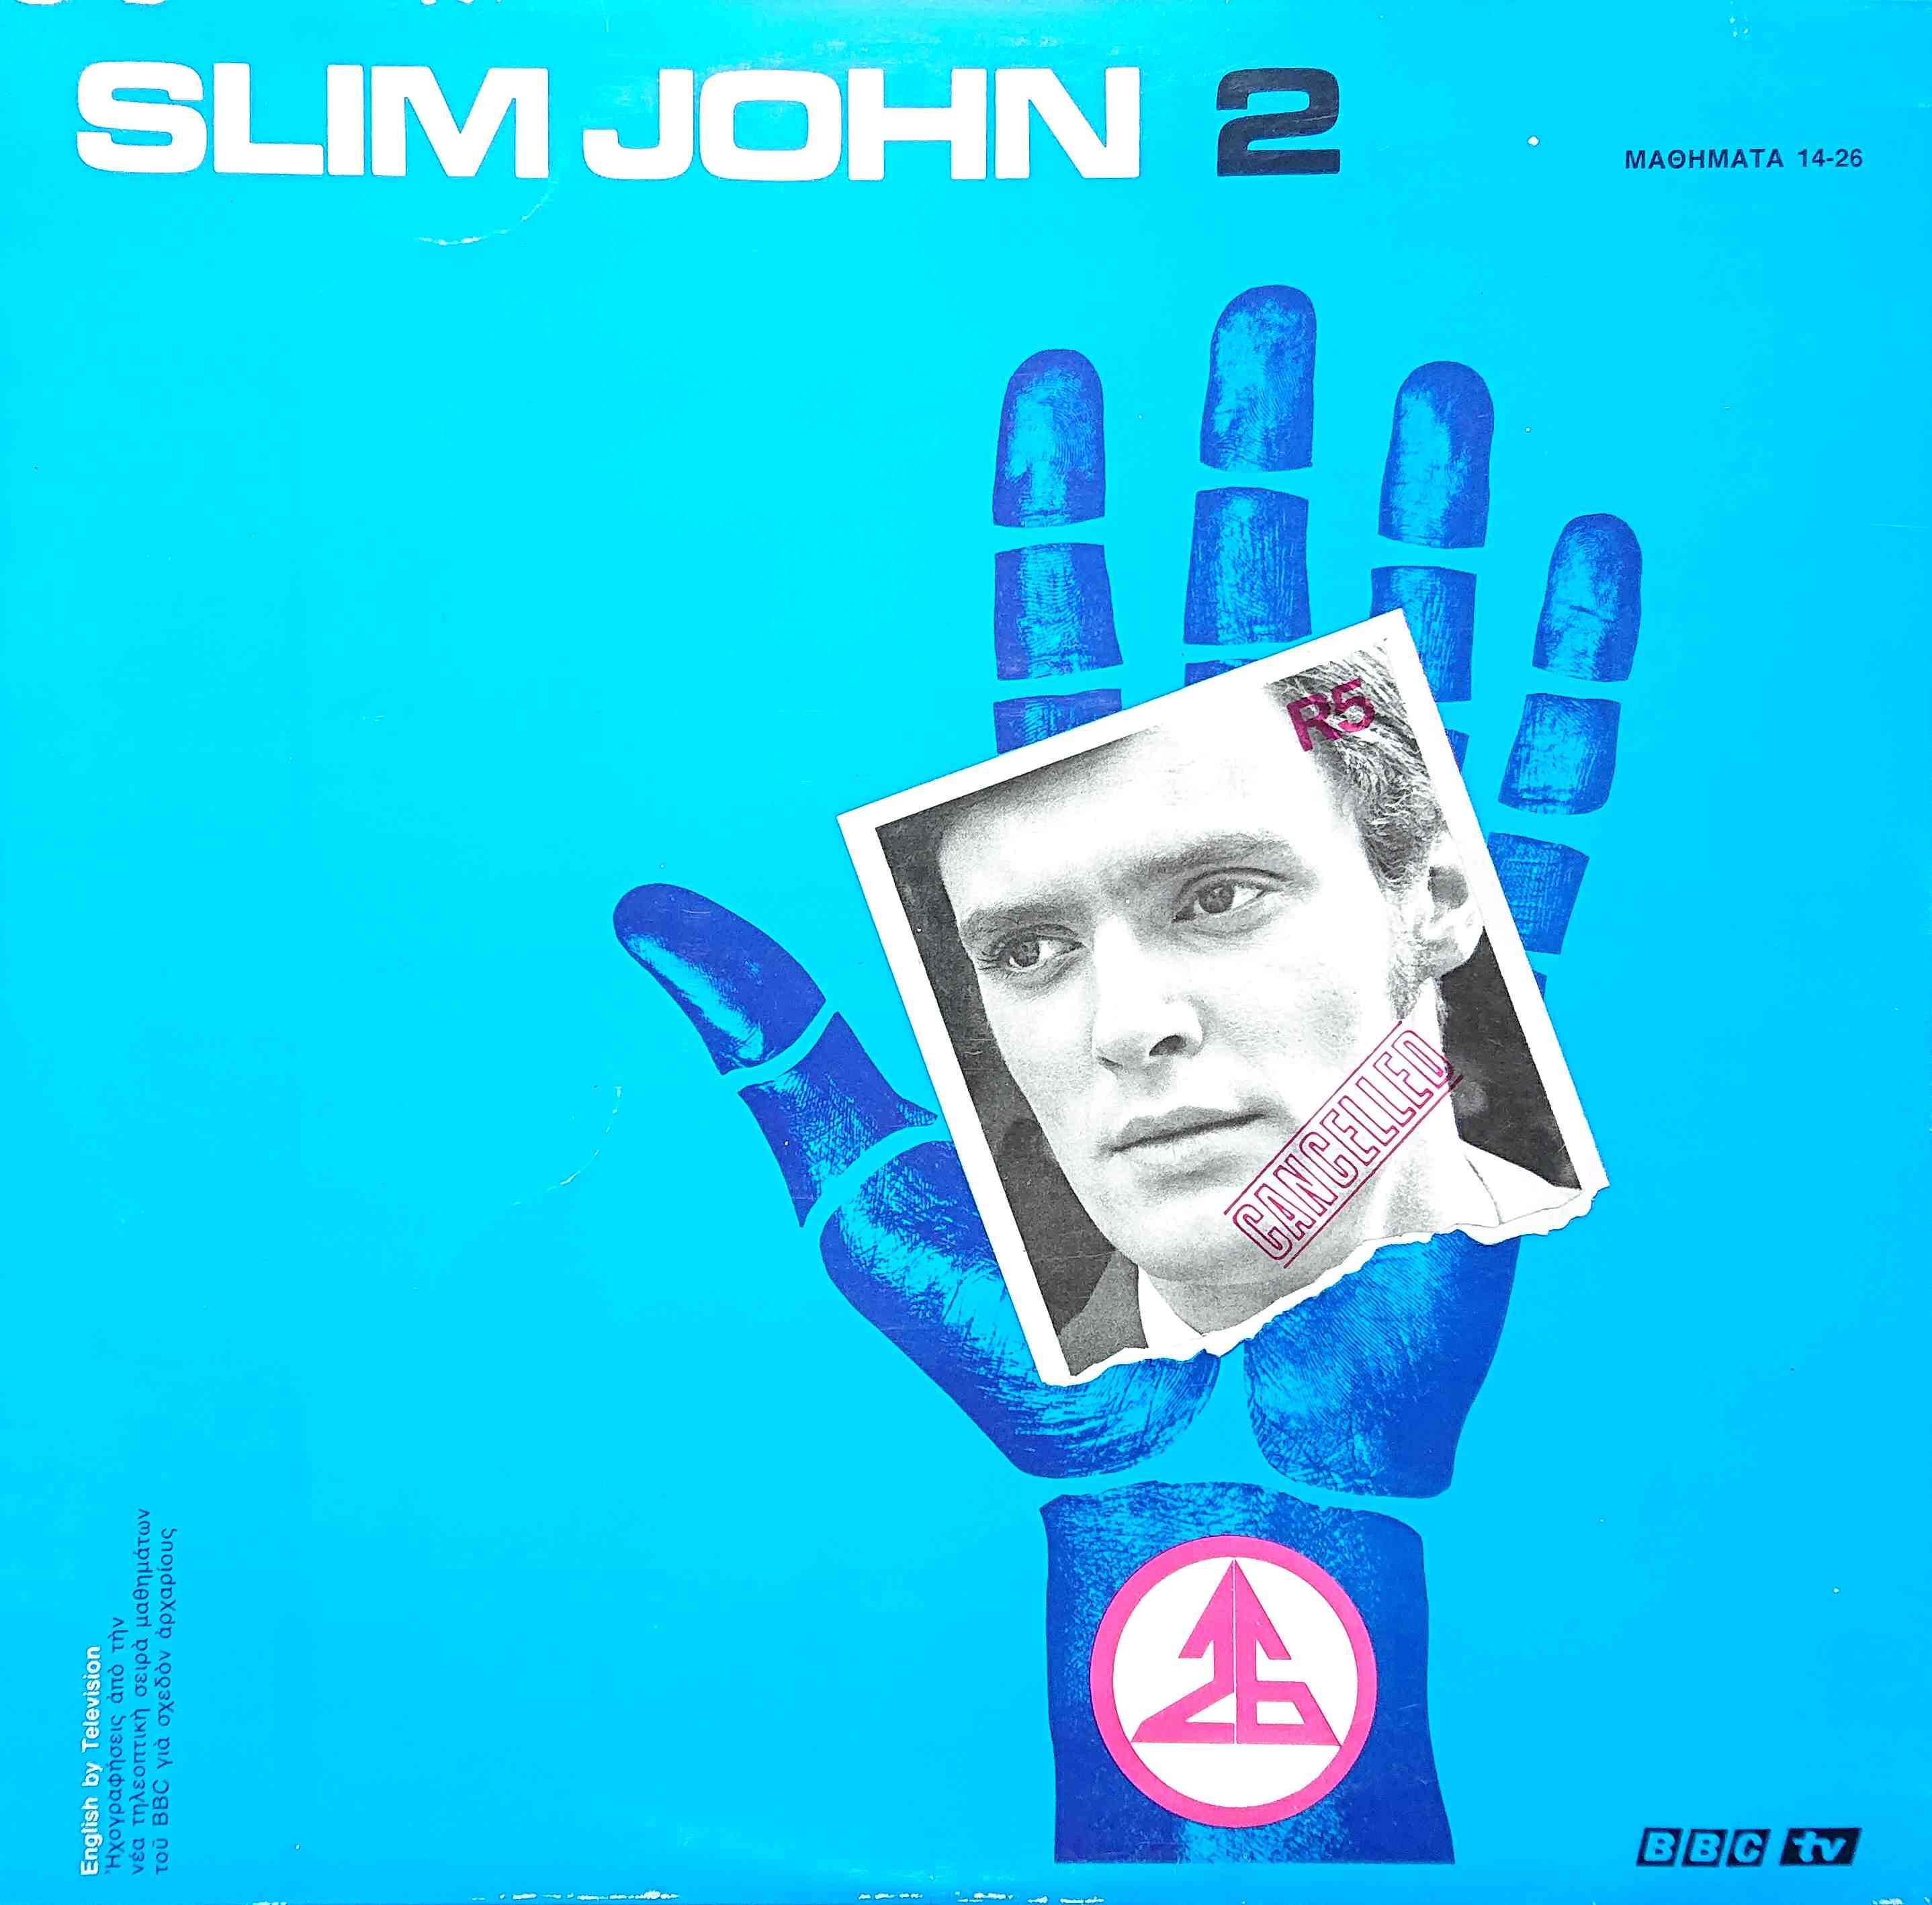 Picture of SJ 2 Slim John 2 by artist Unknown from the BBC albums - Records and Tapes library